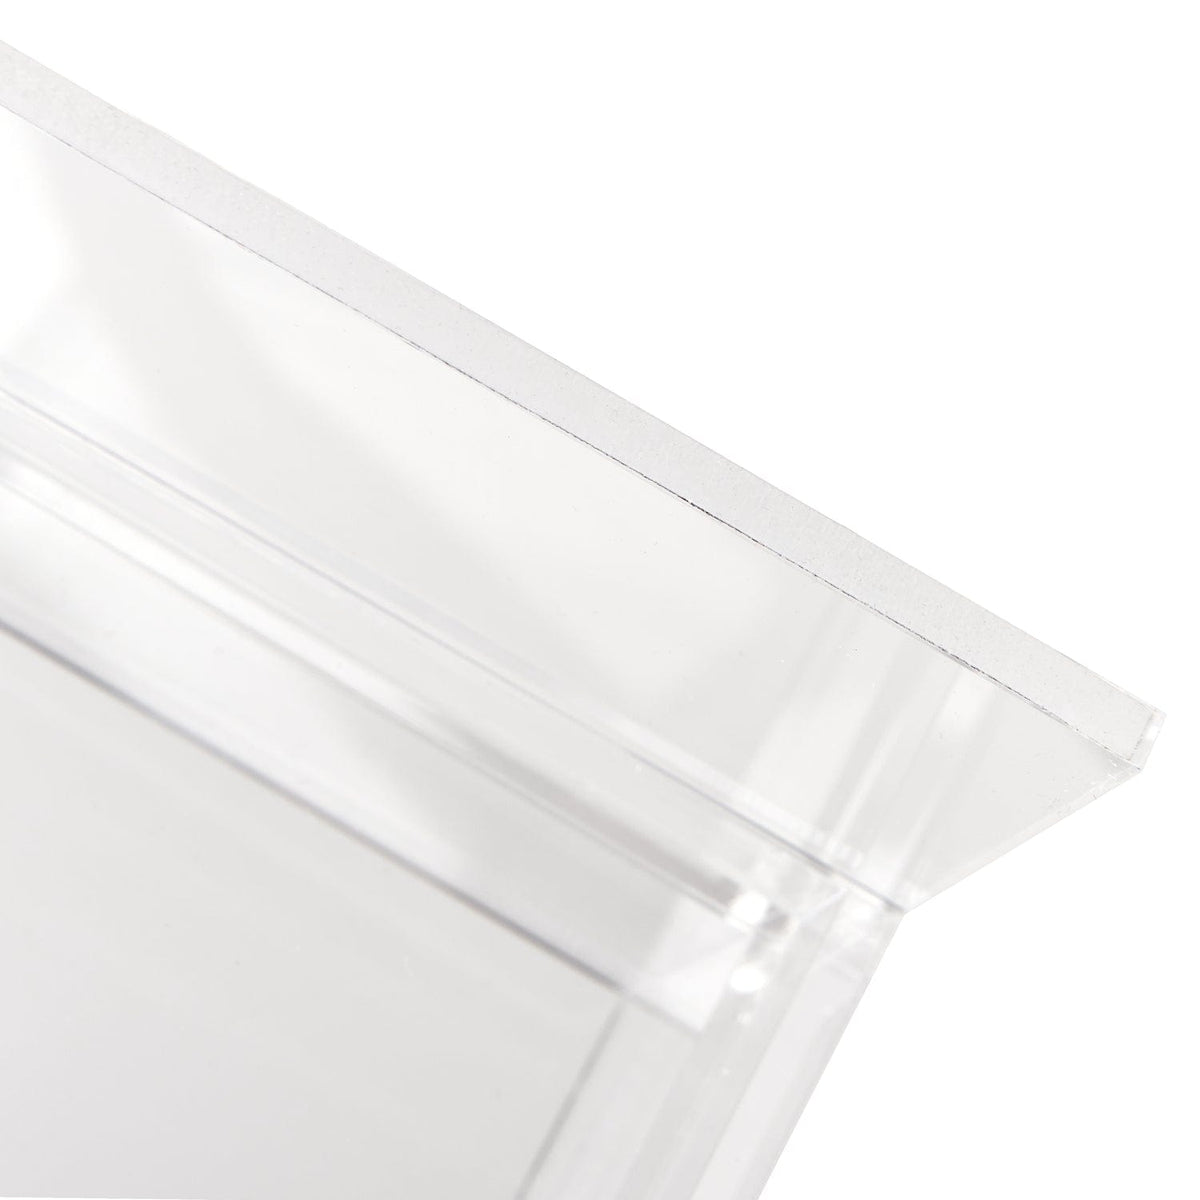 Acrylic Monitor Stand with Drawer 98149 russell+hazel Acrylic Organization